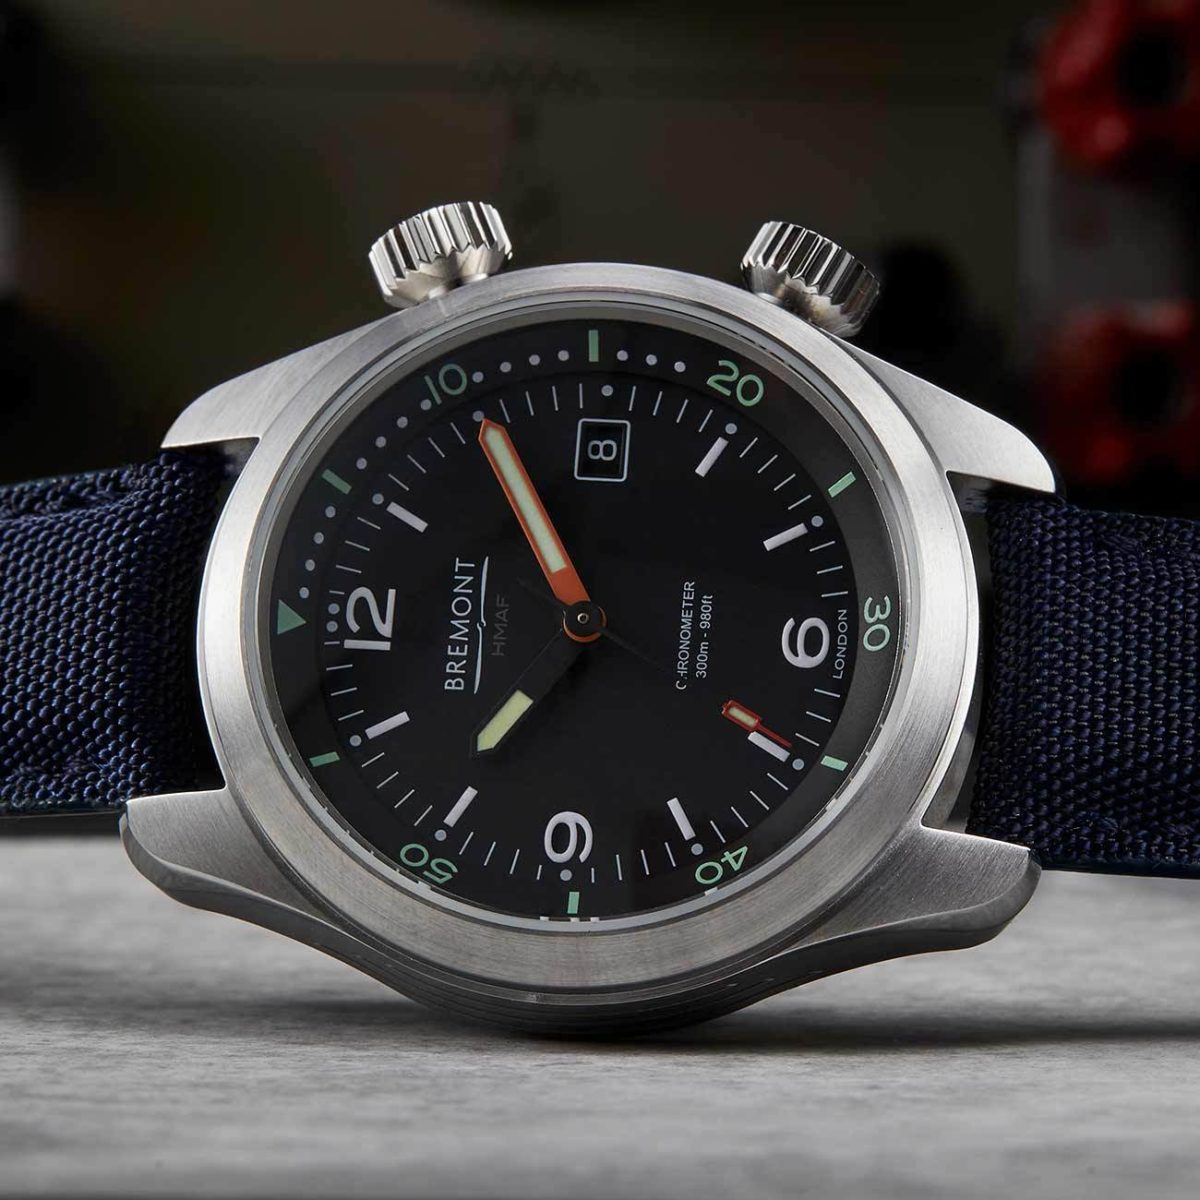 The Best Military Watches To Complete Your Everyday Carry